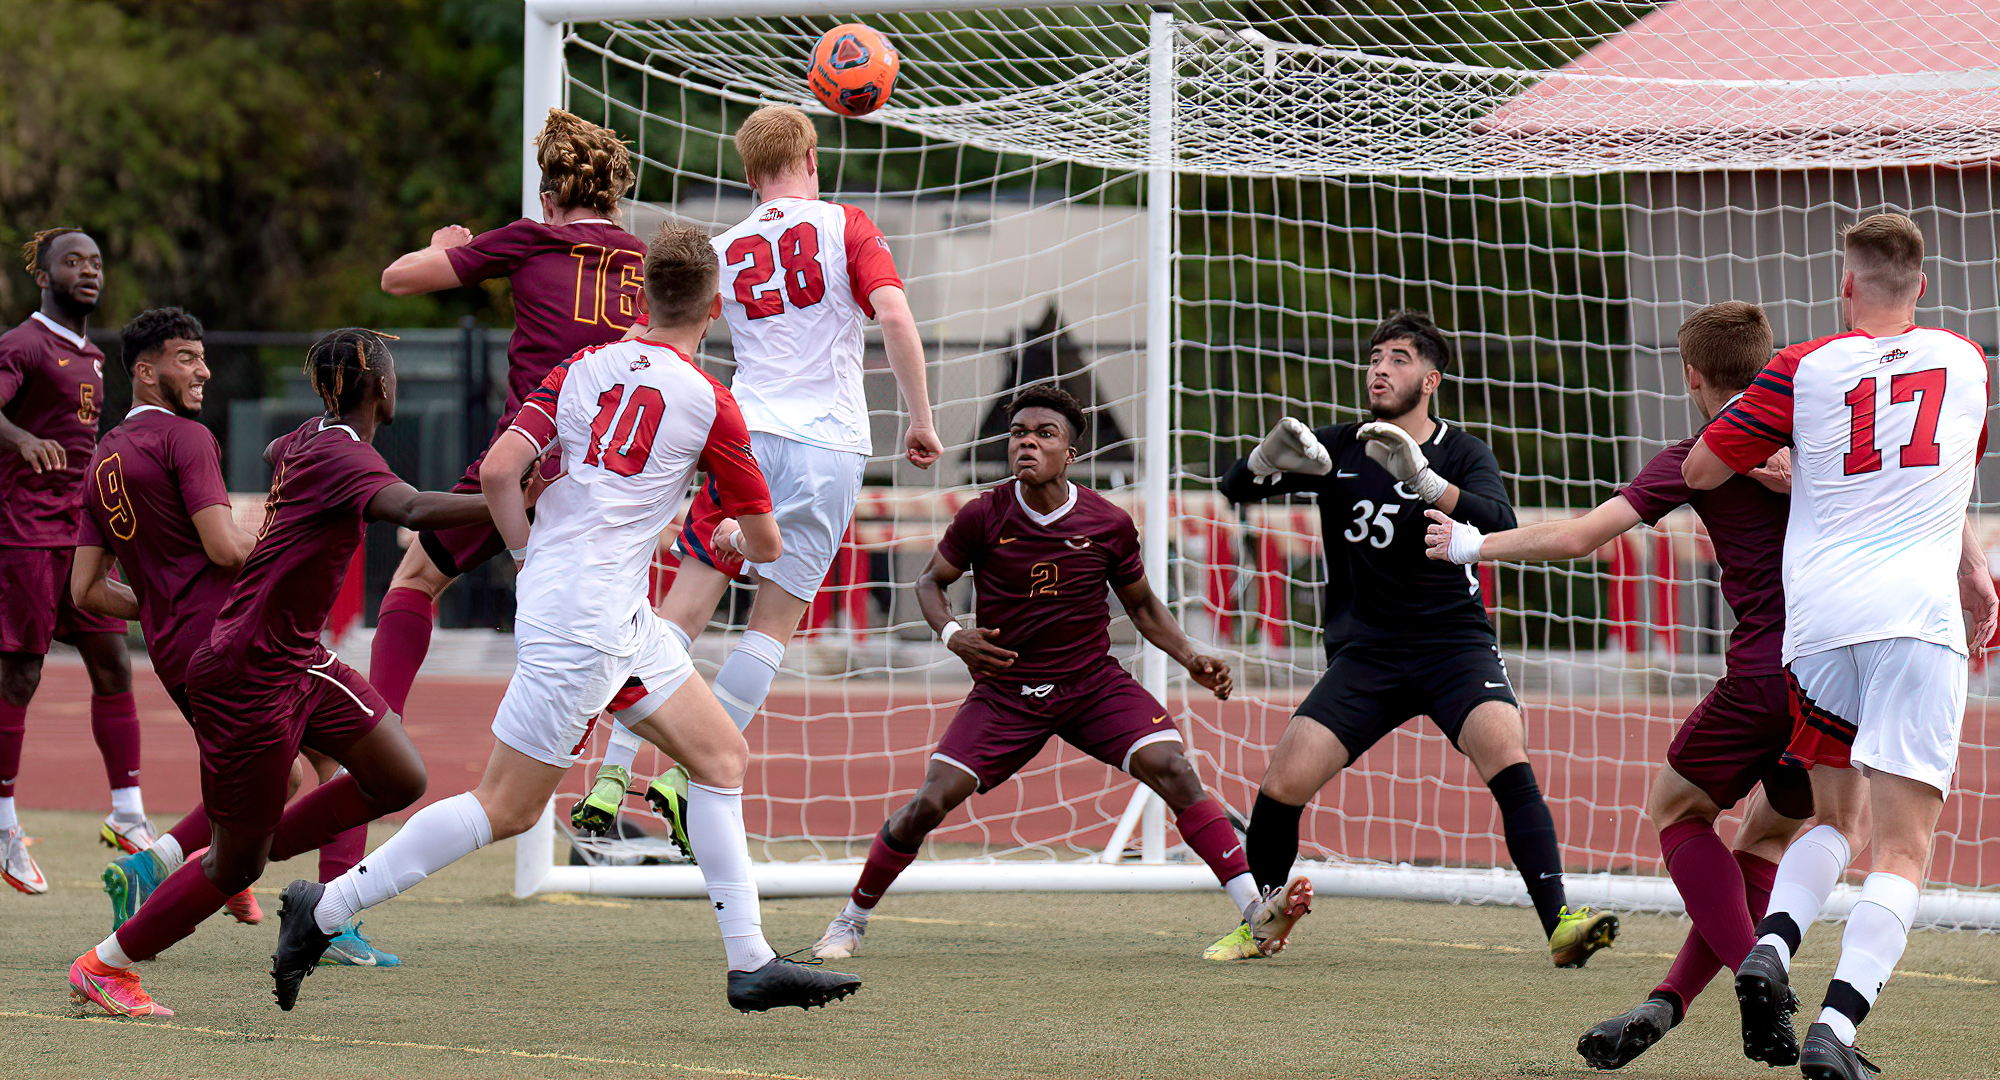 The Cobber defense converges on a would-be goal scorer in their 2-0 win at St. Mary's. Goalie Erick Torres (#35) made six saves to get the shutout. (Photo courtesy of SMU Sports Information)